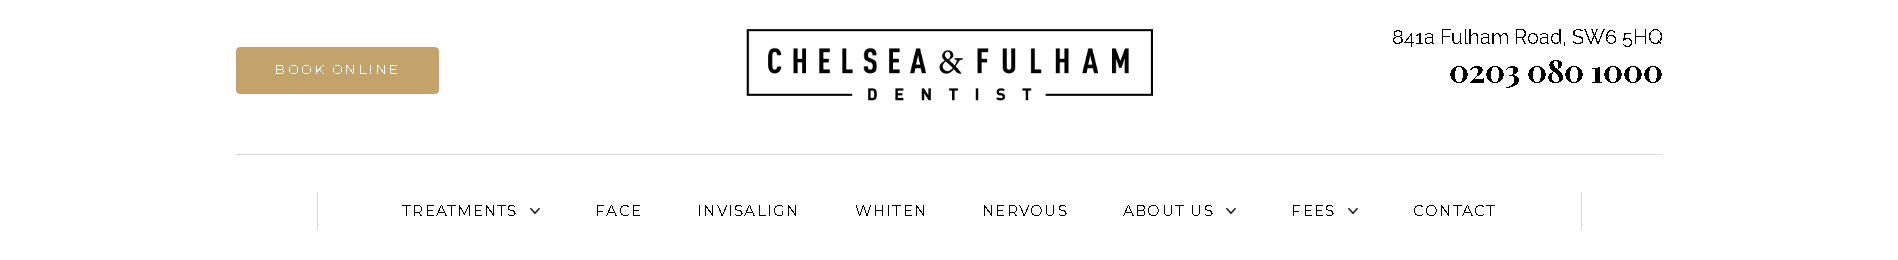 Chelsea and Fulham Dentist